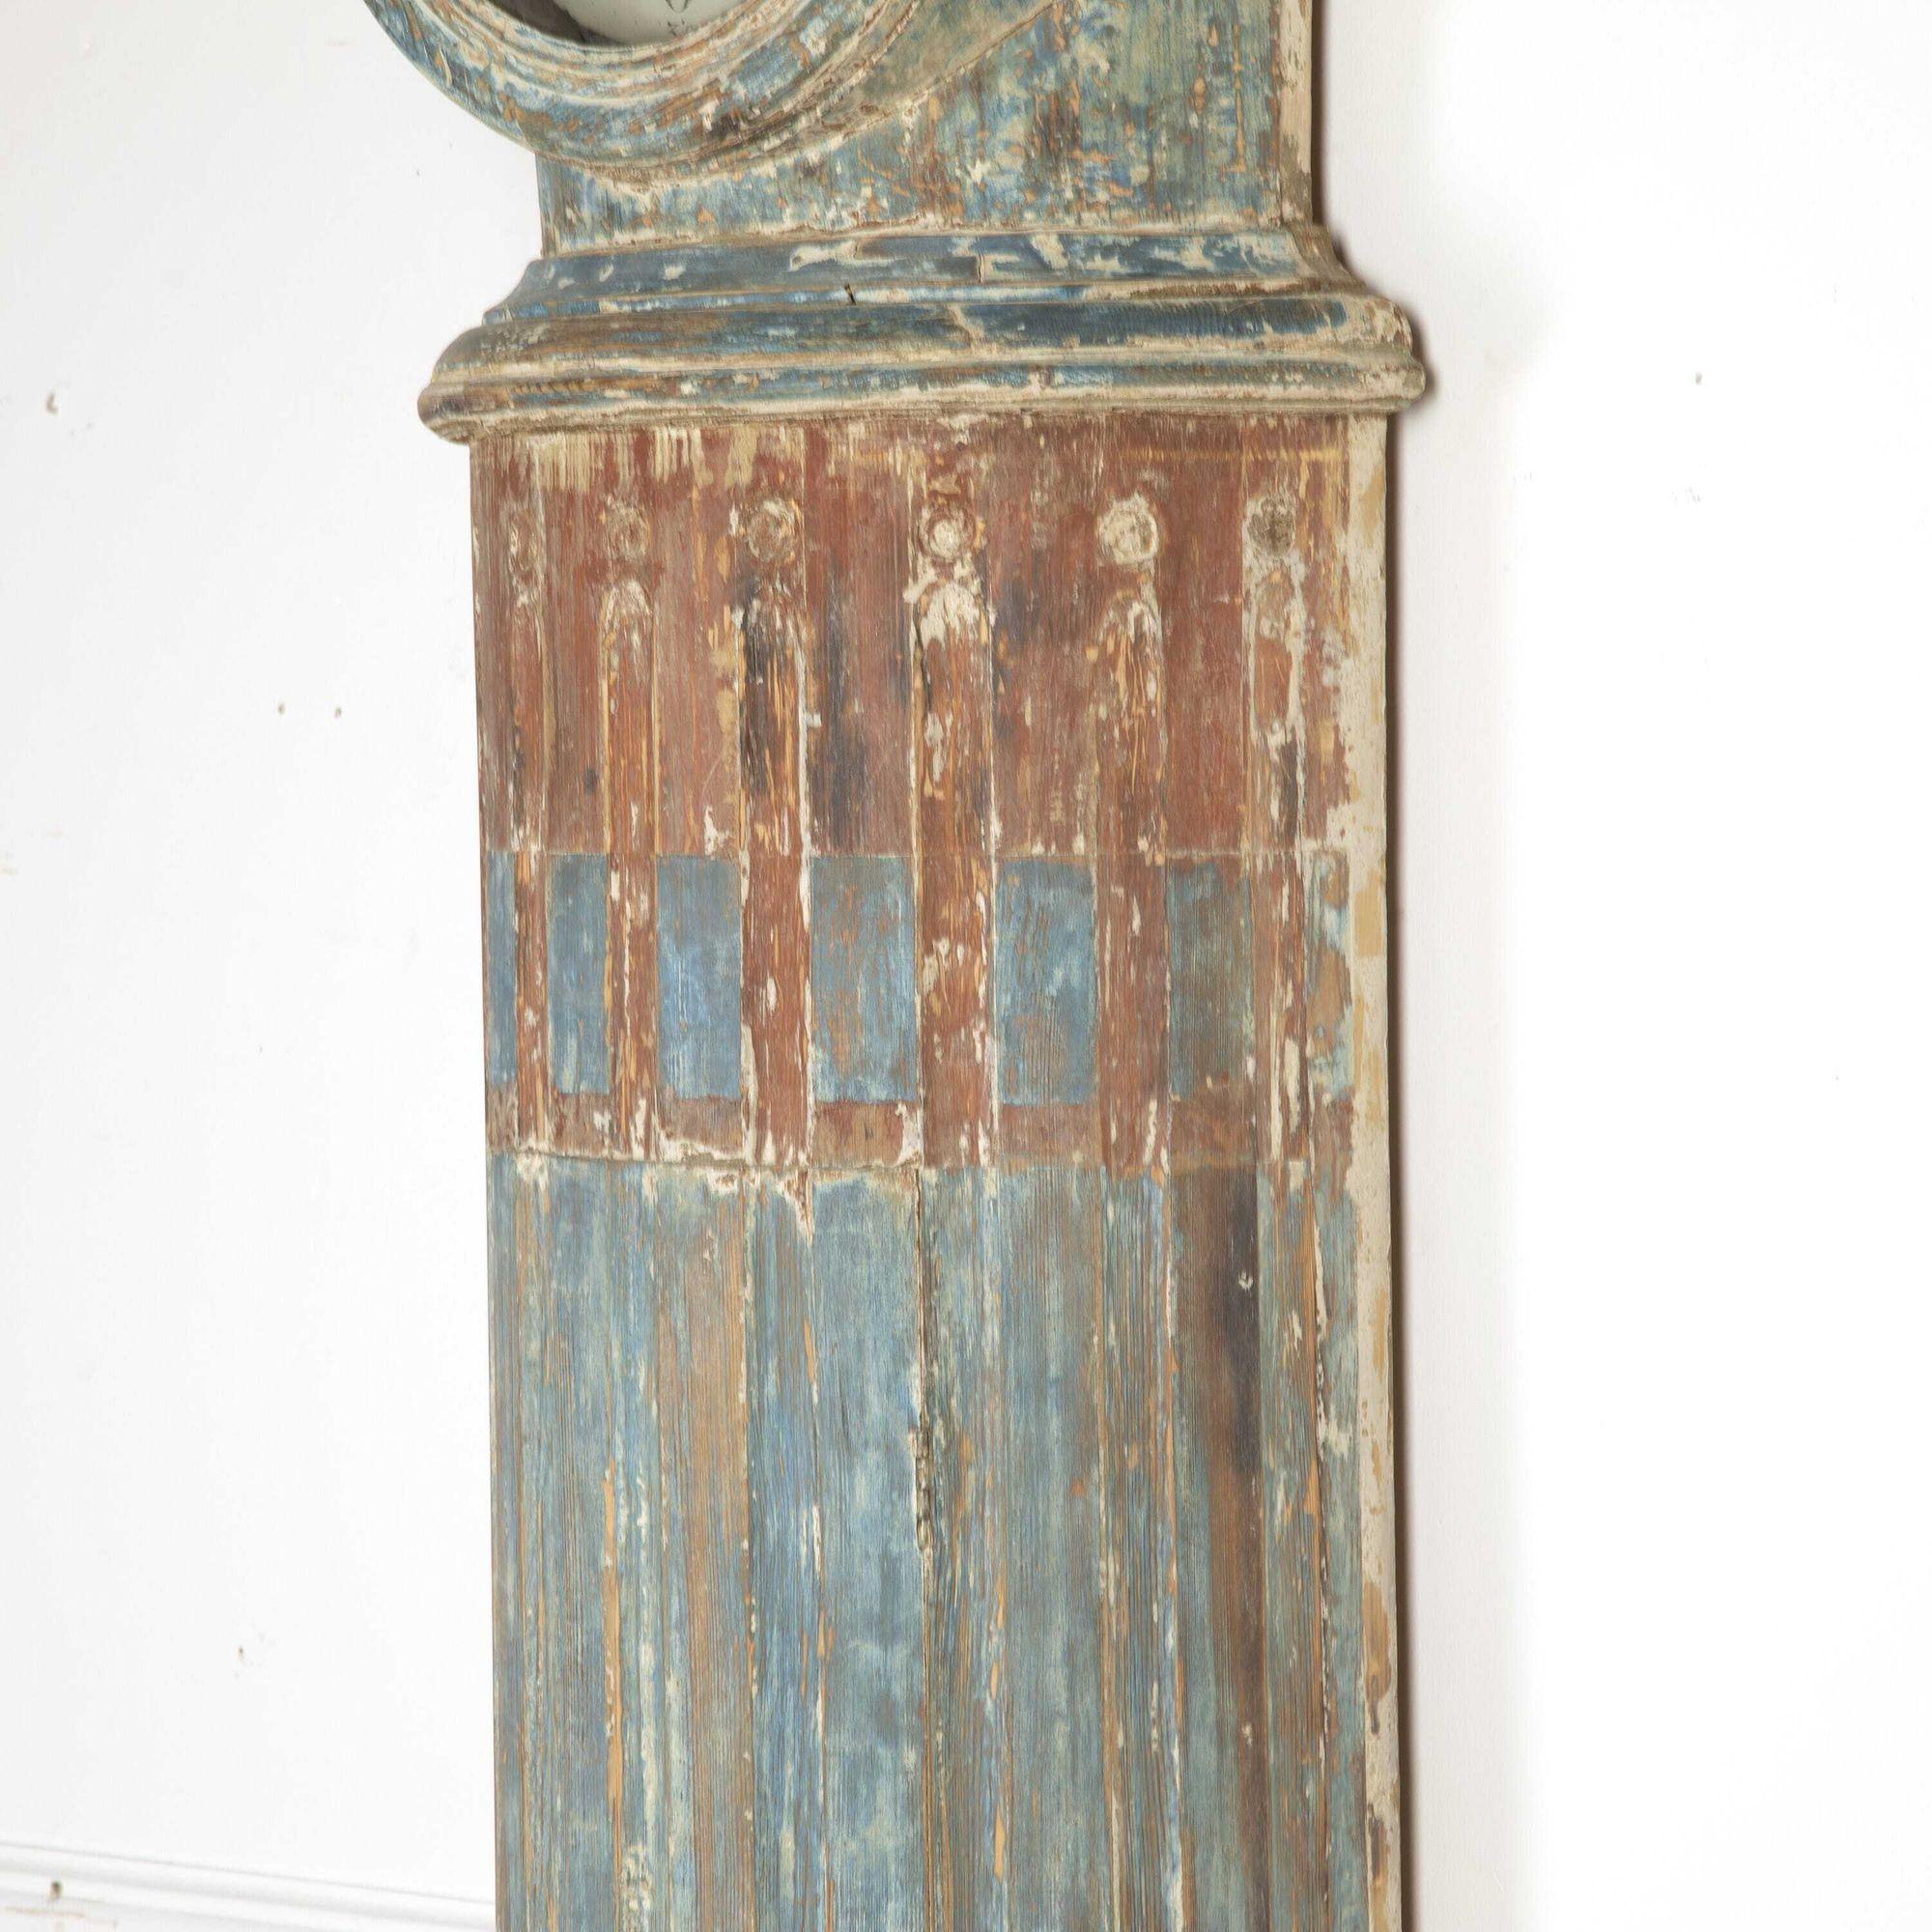 Swedish early 19th Century column clock with original painted decoration.
This clock has a lovely elegant shape, with unusual scrolled decoration to the neck. It has been dry-scraped to its original paint that is rich in patina and graining. 
A